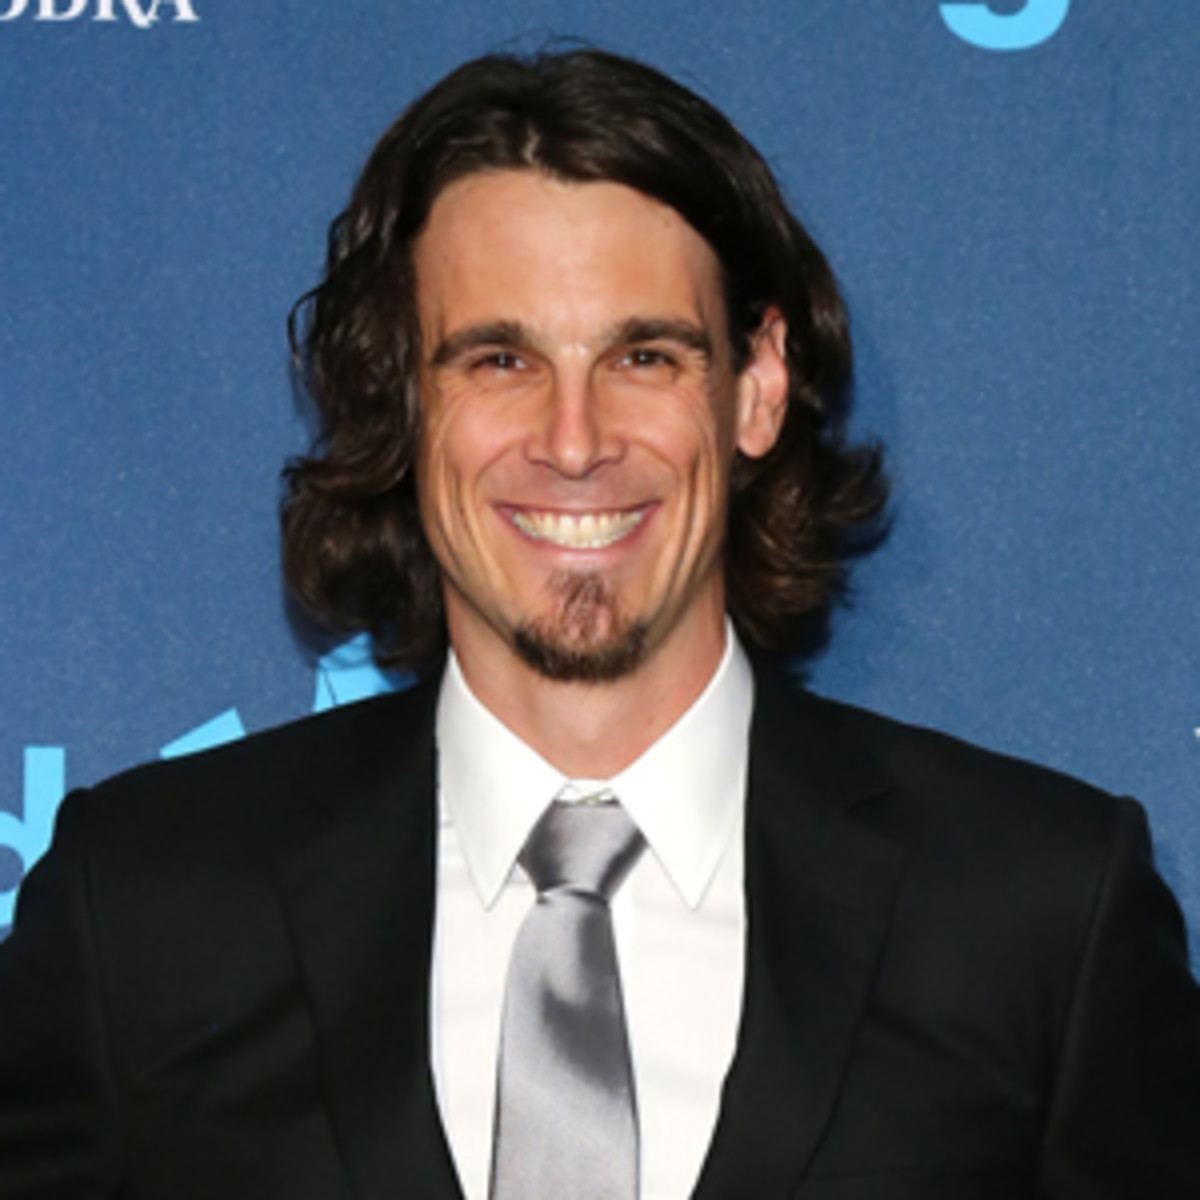 Chris Kluwe attended the 24th Annual GLAAD Media Awards in March. (Nelson Barnard/Getty Images)